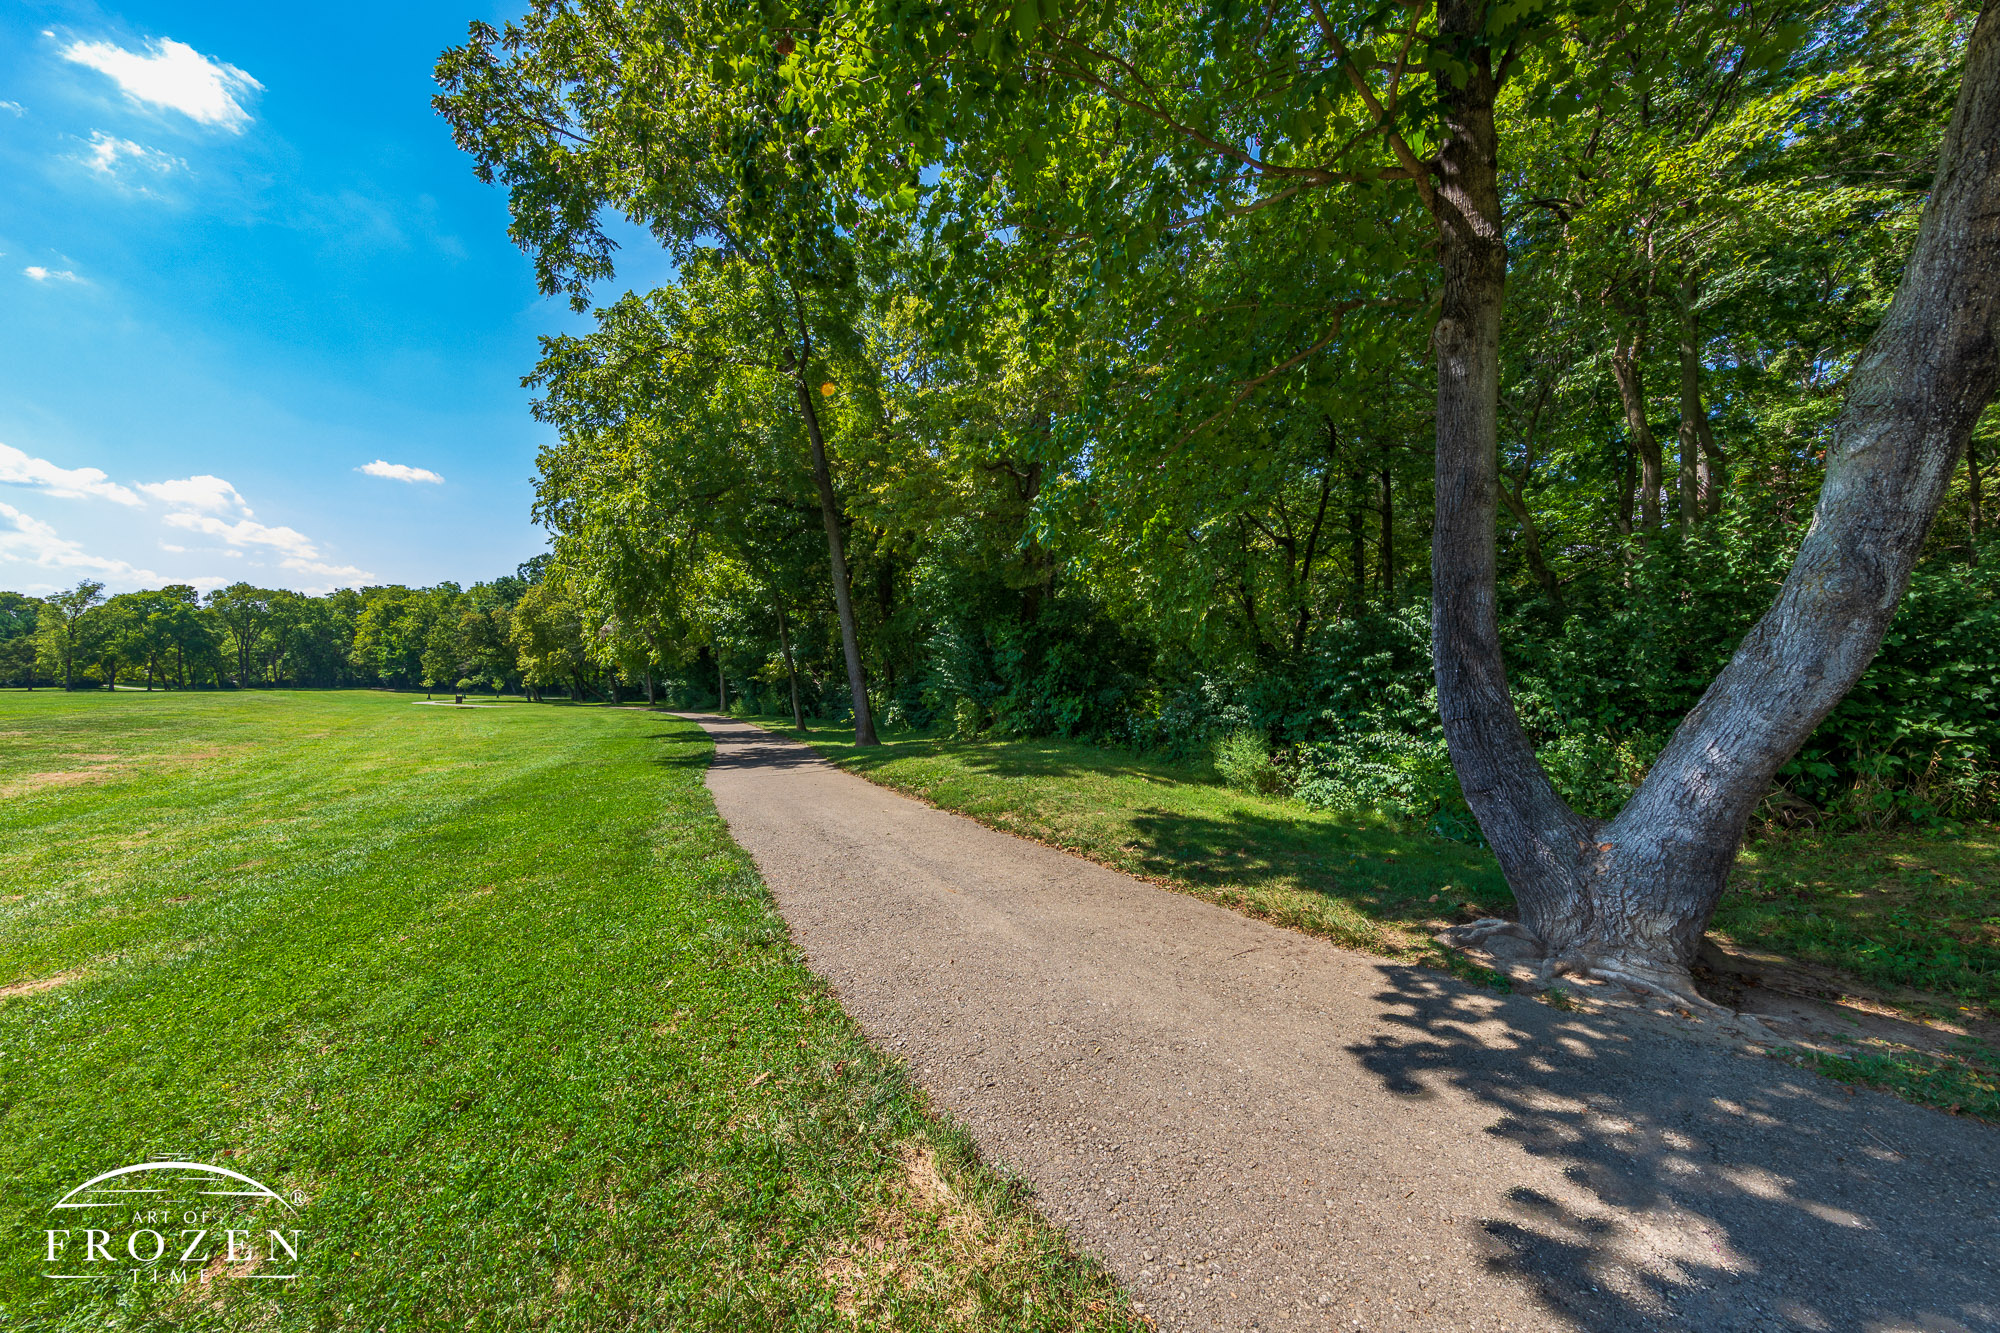 A walking path at North Park in Springboro Ohio which takes visitors along the shady treeline